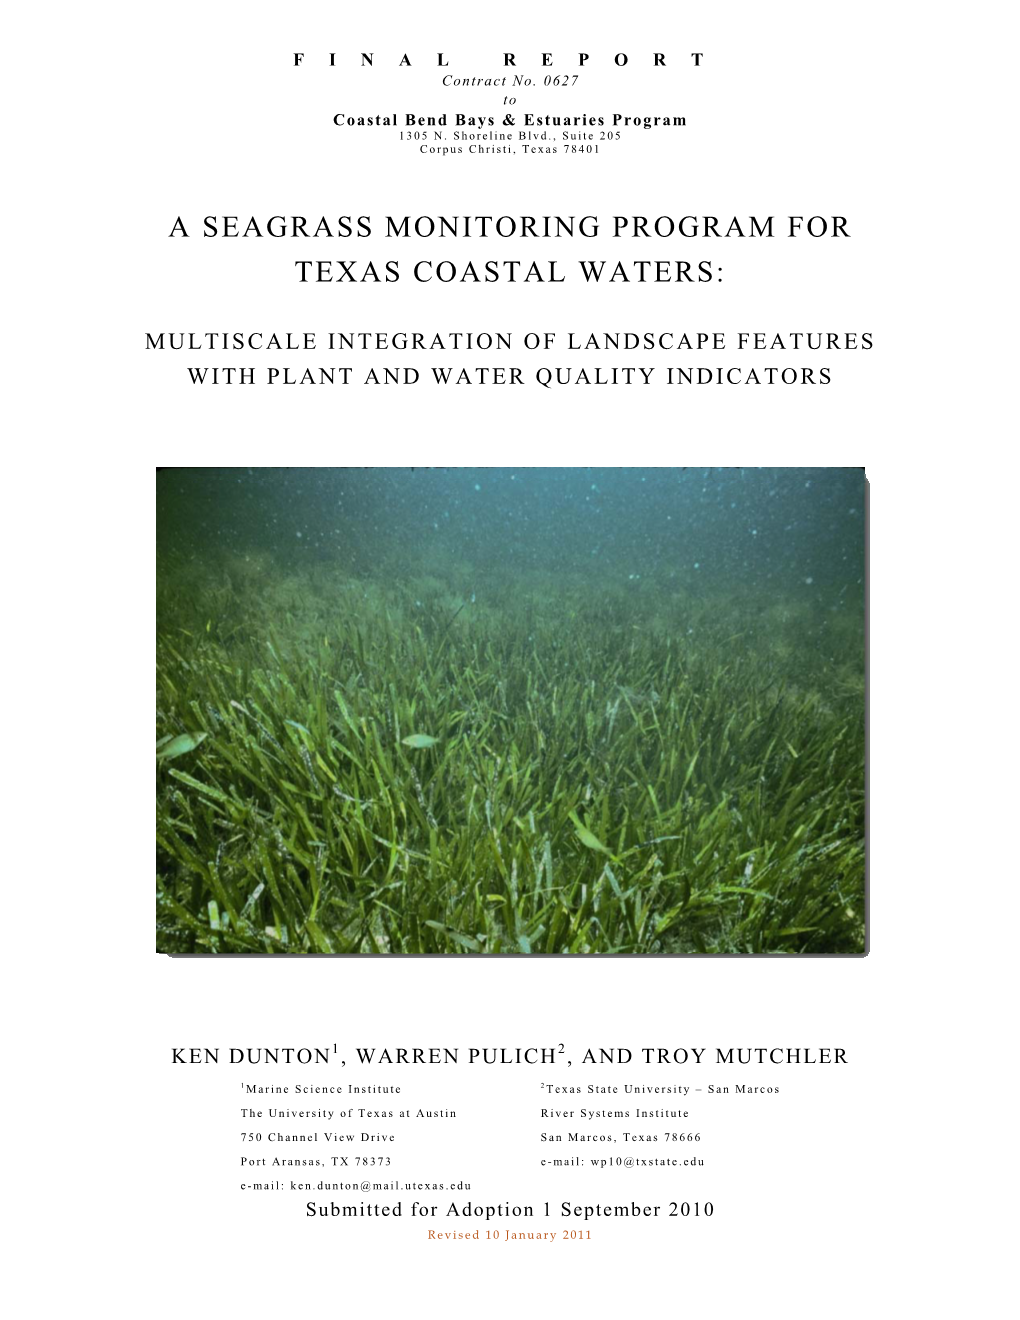 A Seagrass Monitoring Program for Texas Coastal Waters